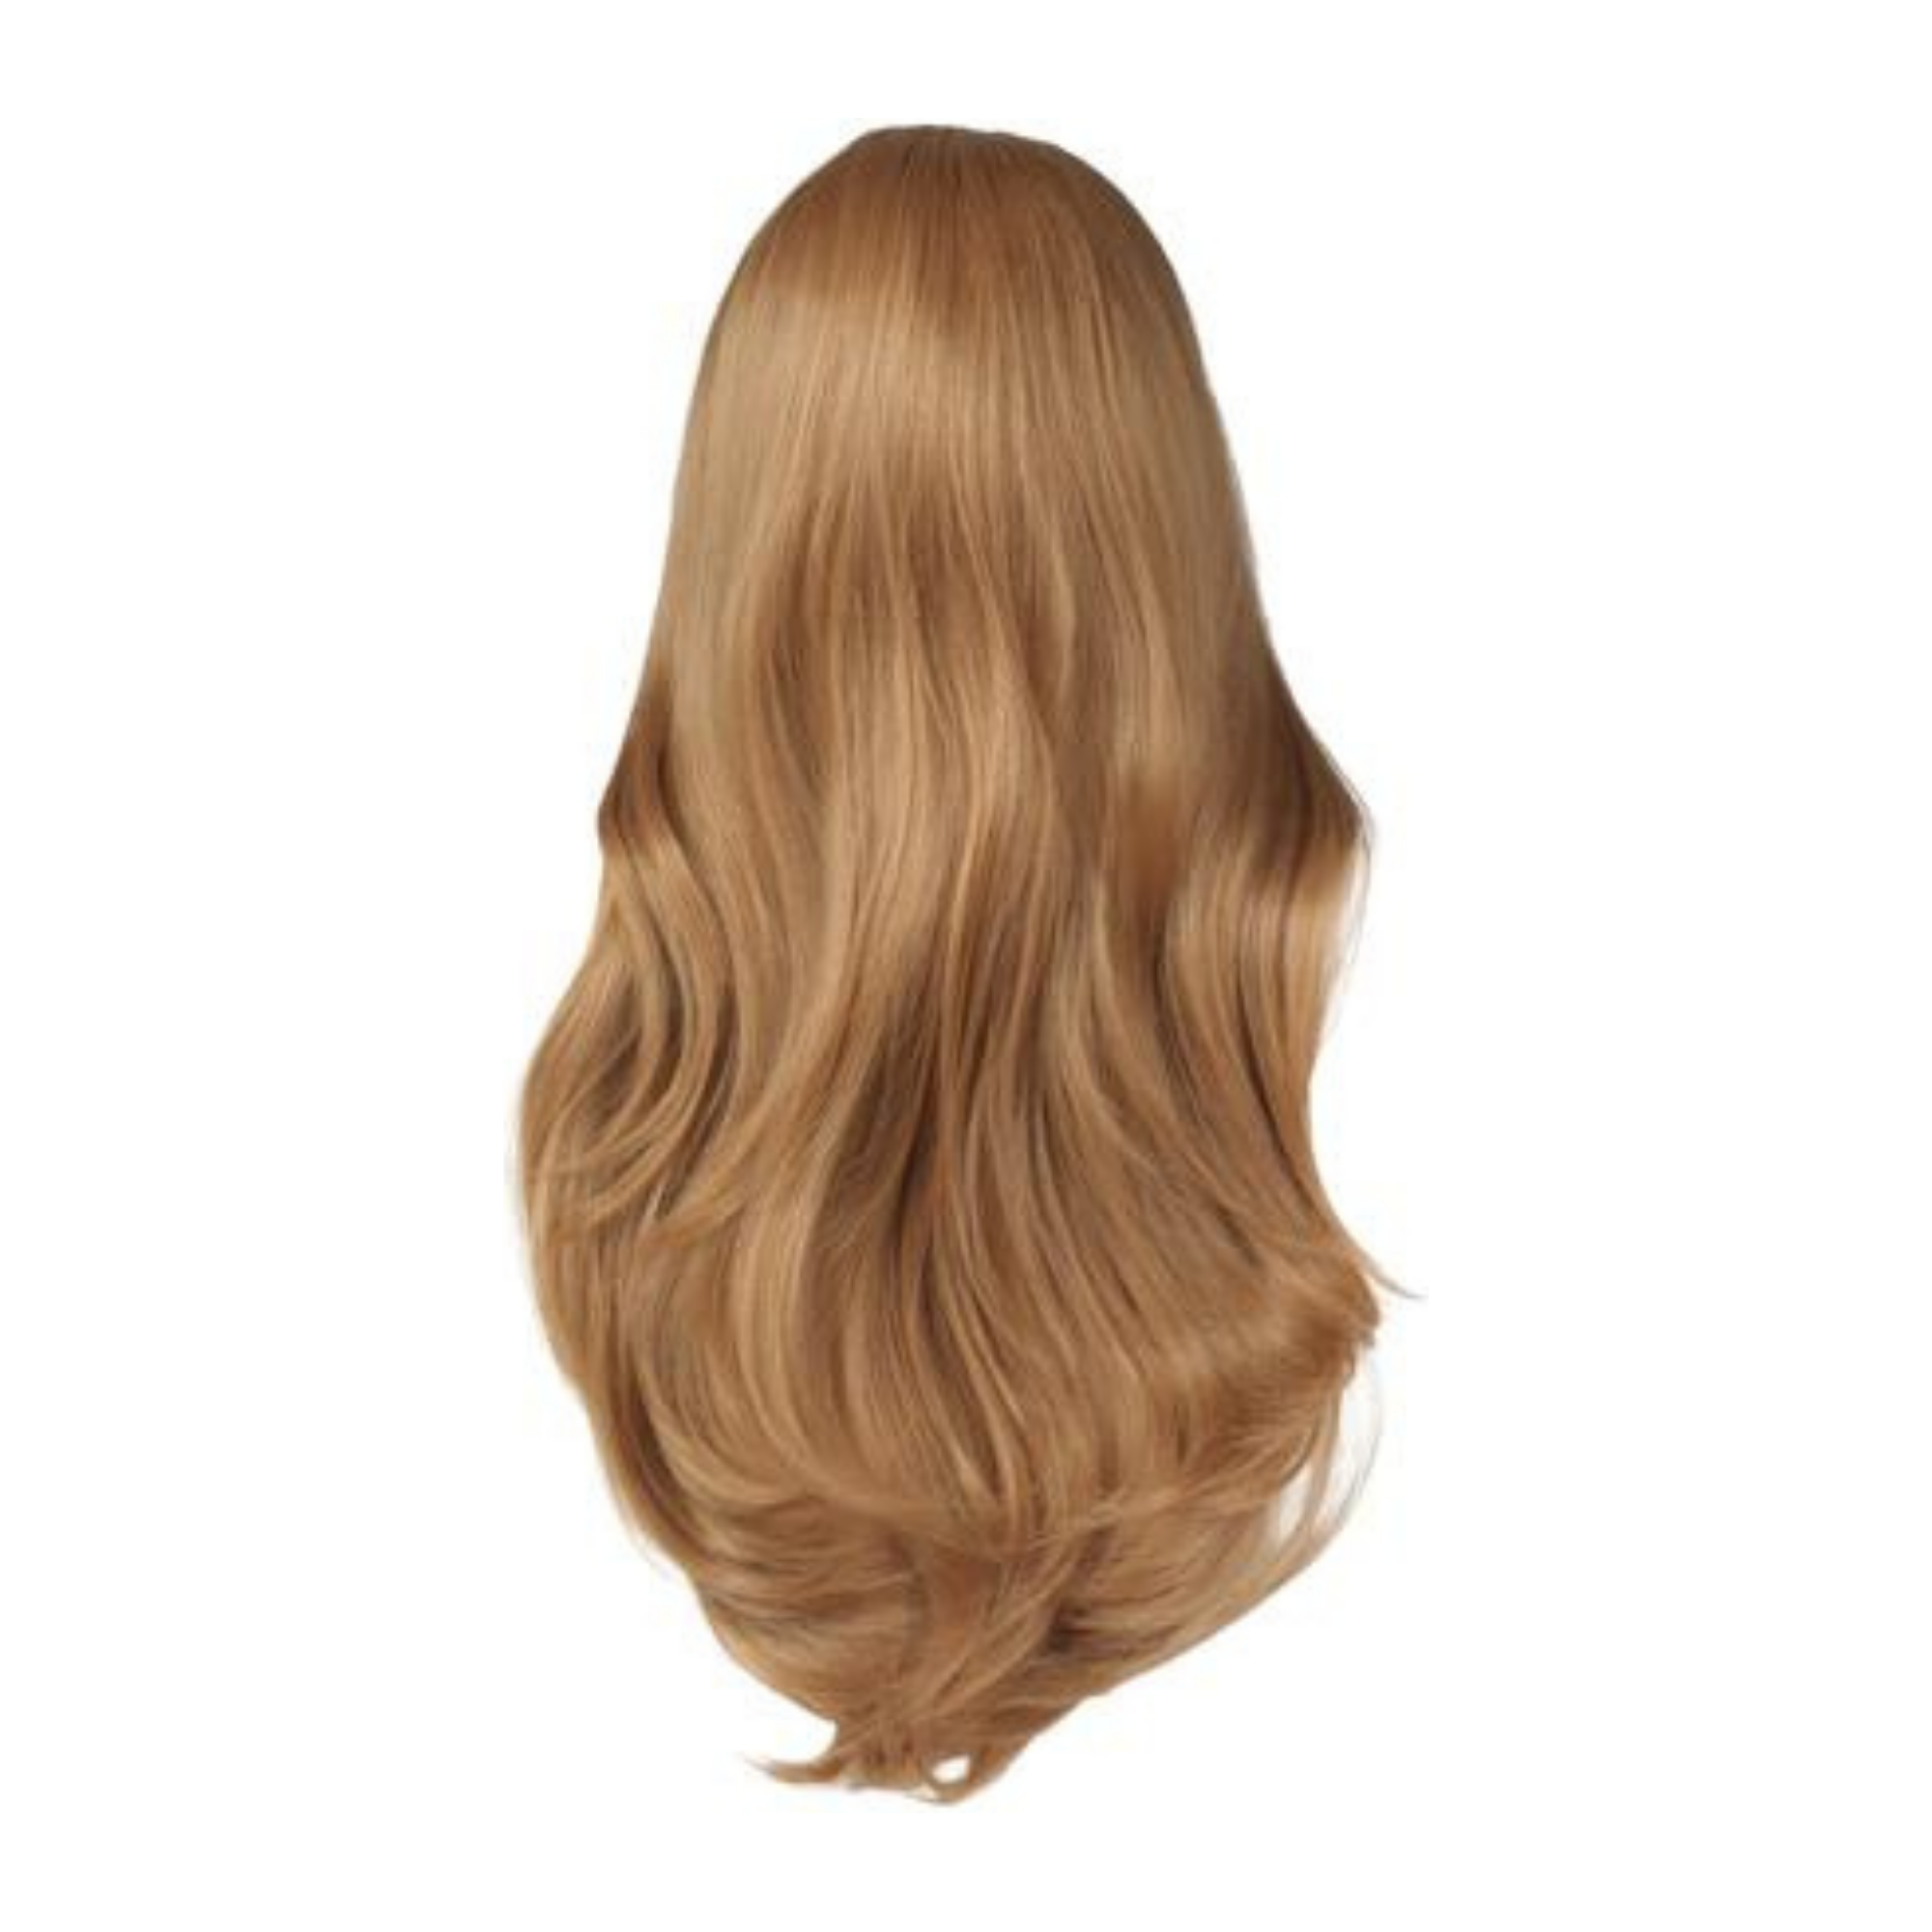 image of hair rehab london half wig hairpiece in shade toffee